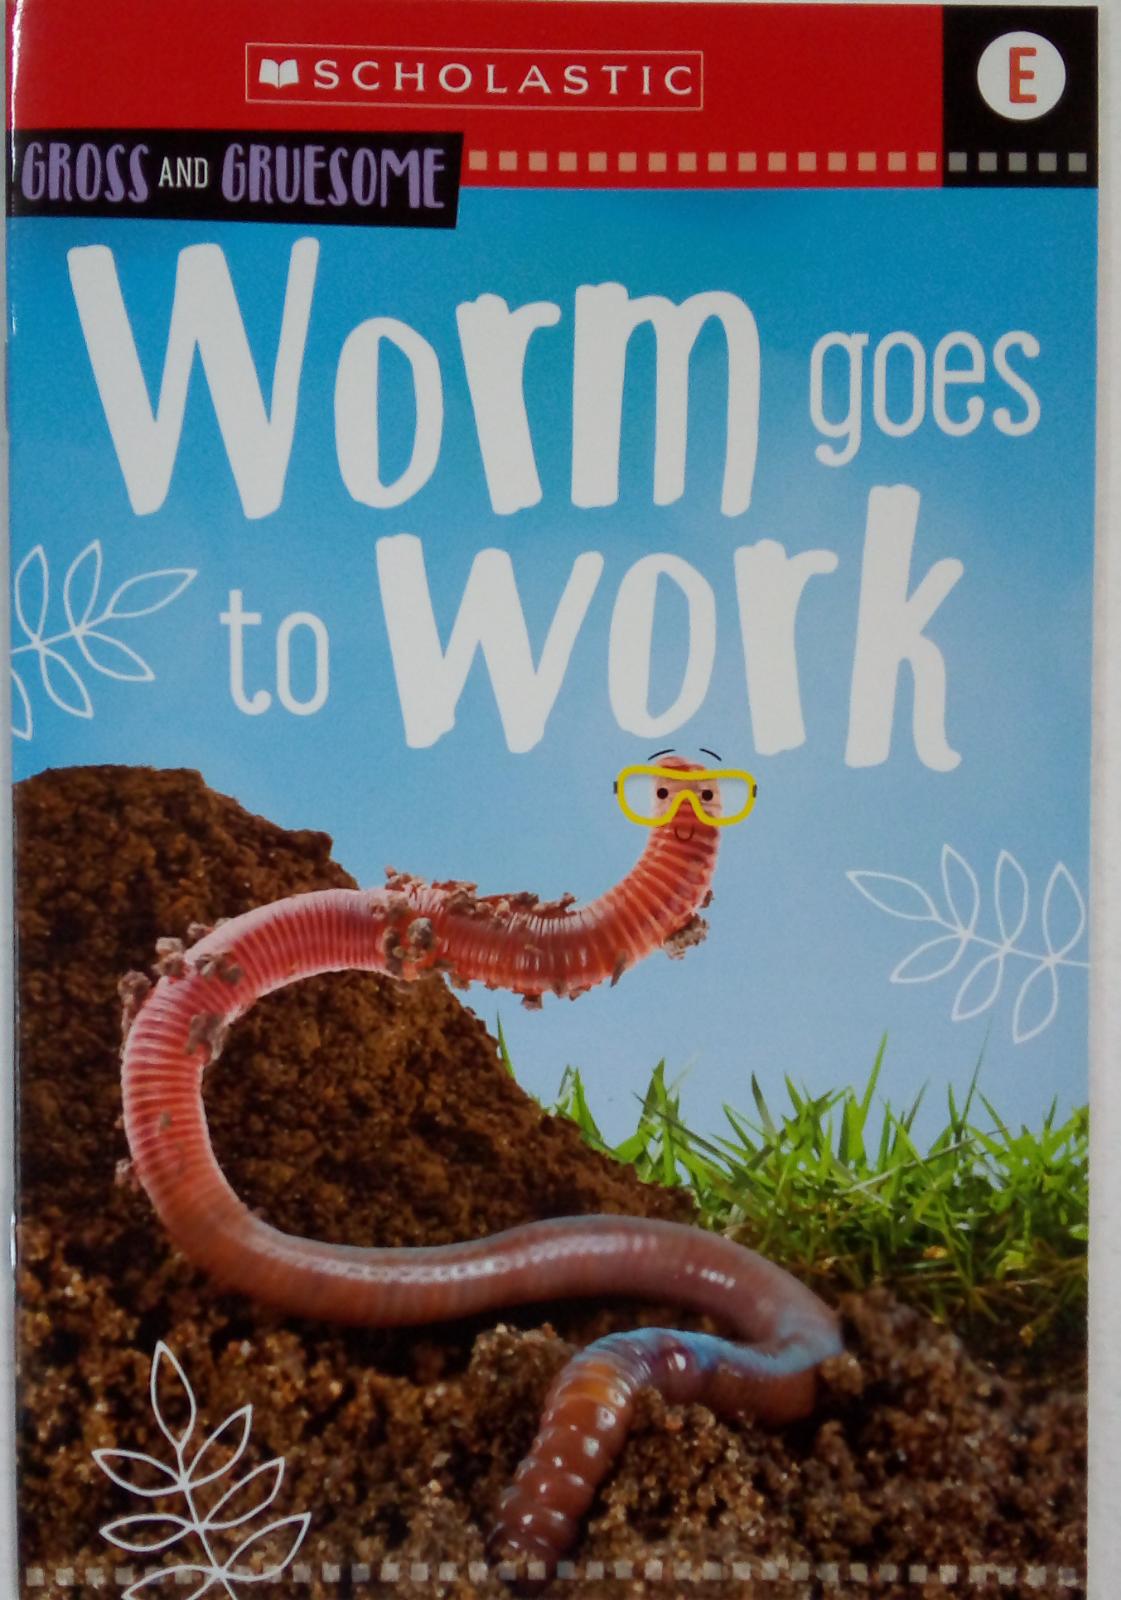 IMG : Animal Antics Gross and Gruesome Worm goes to work